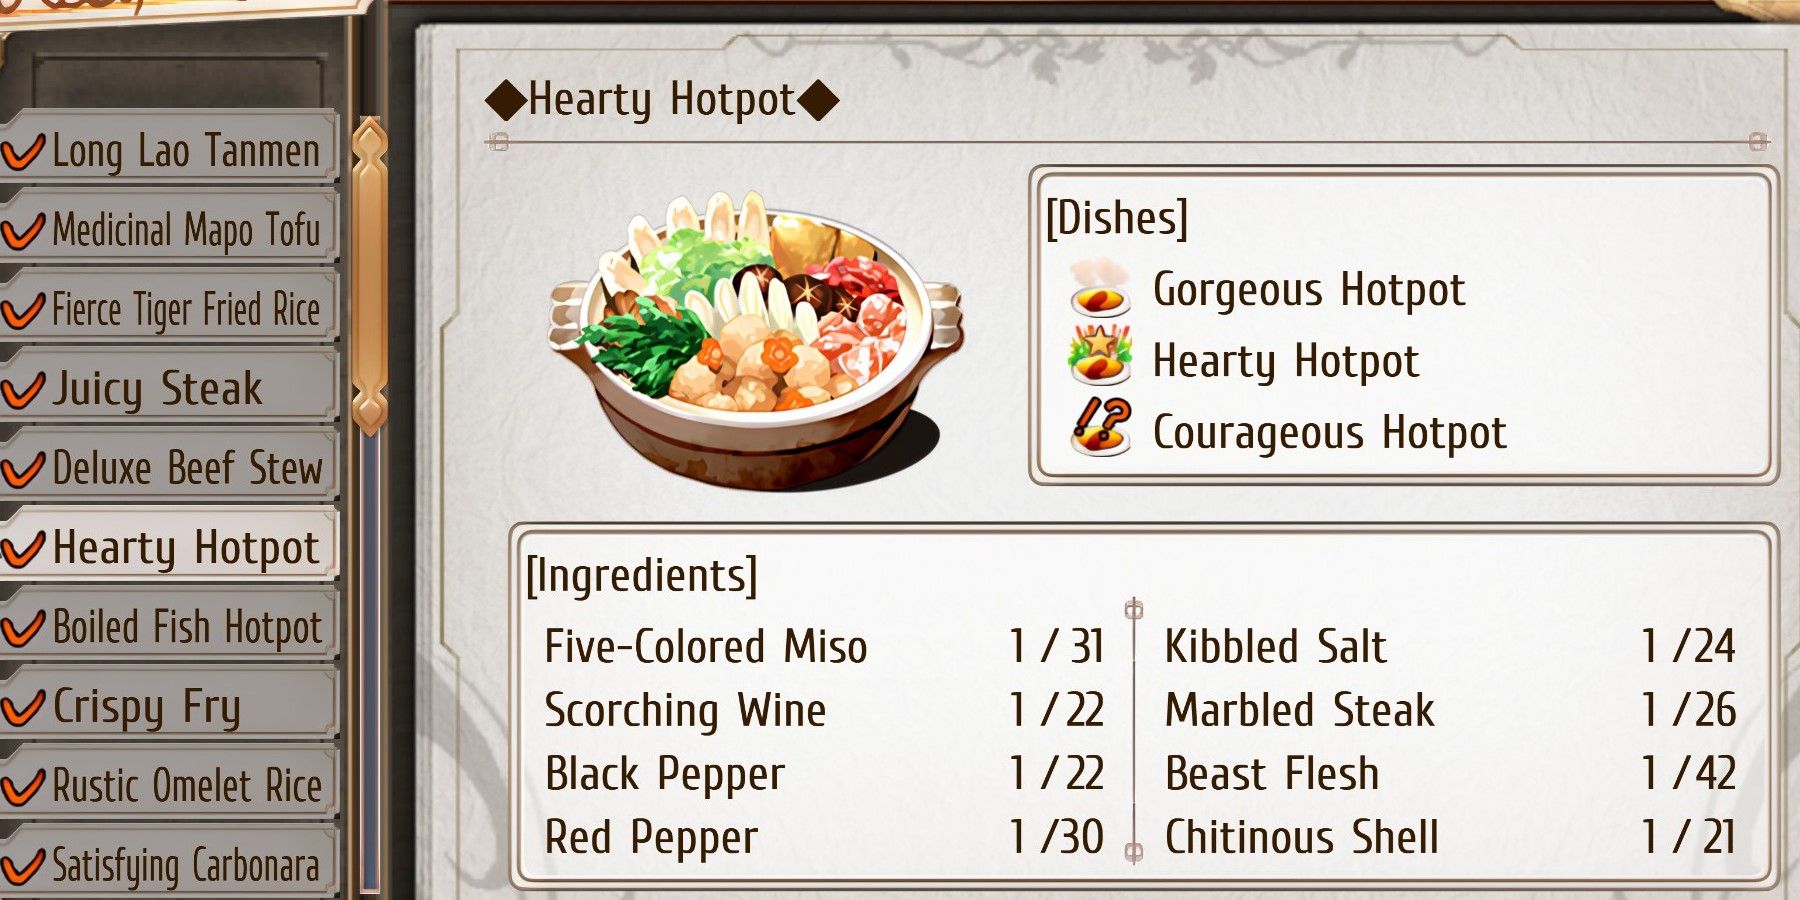 Hearty Hotpot recipe and ingredient list